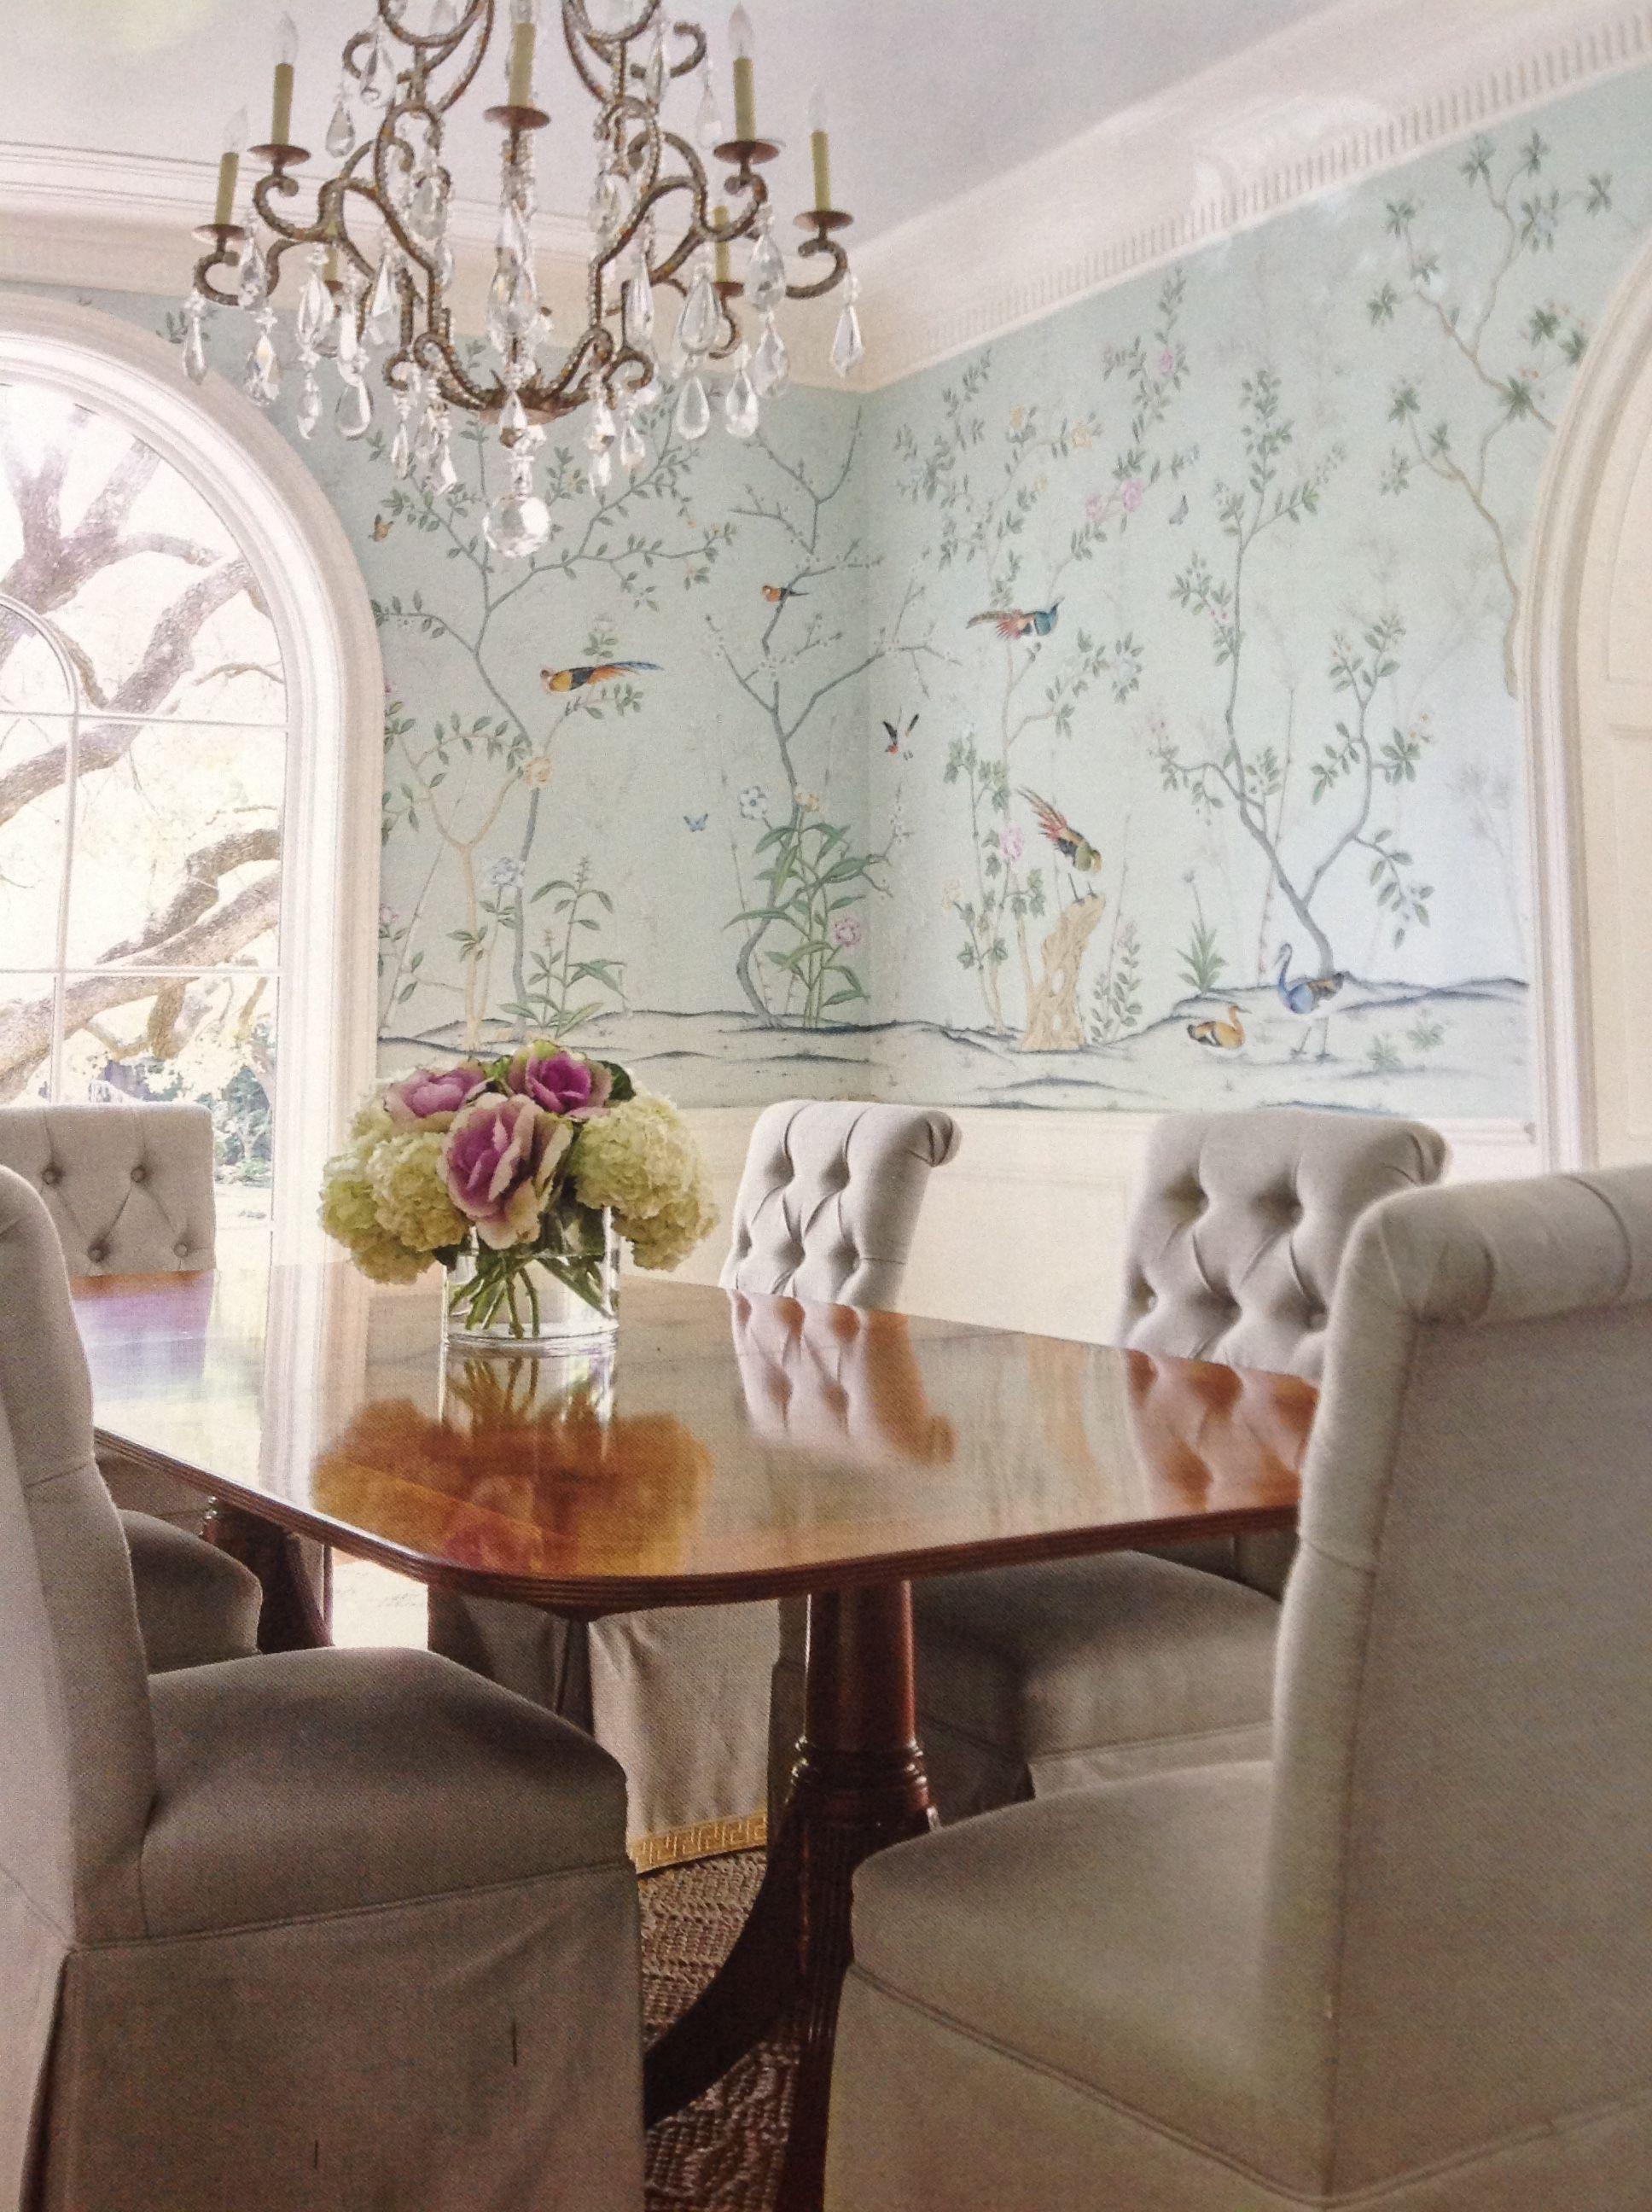 1936 x 2592 · jpeg - Metal Dining Room Table And Chairs Victorian Wallpaper / The dining ...